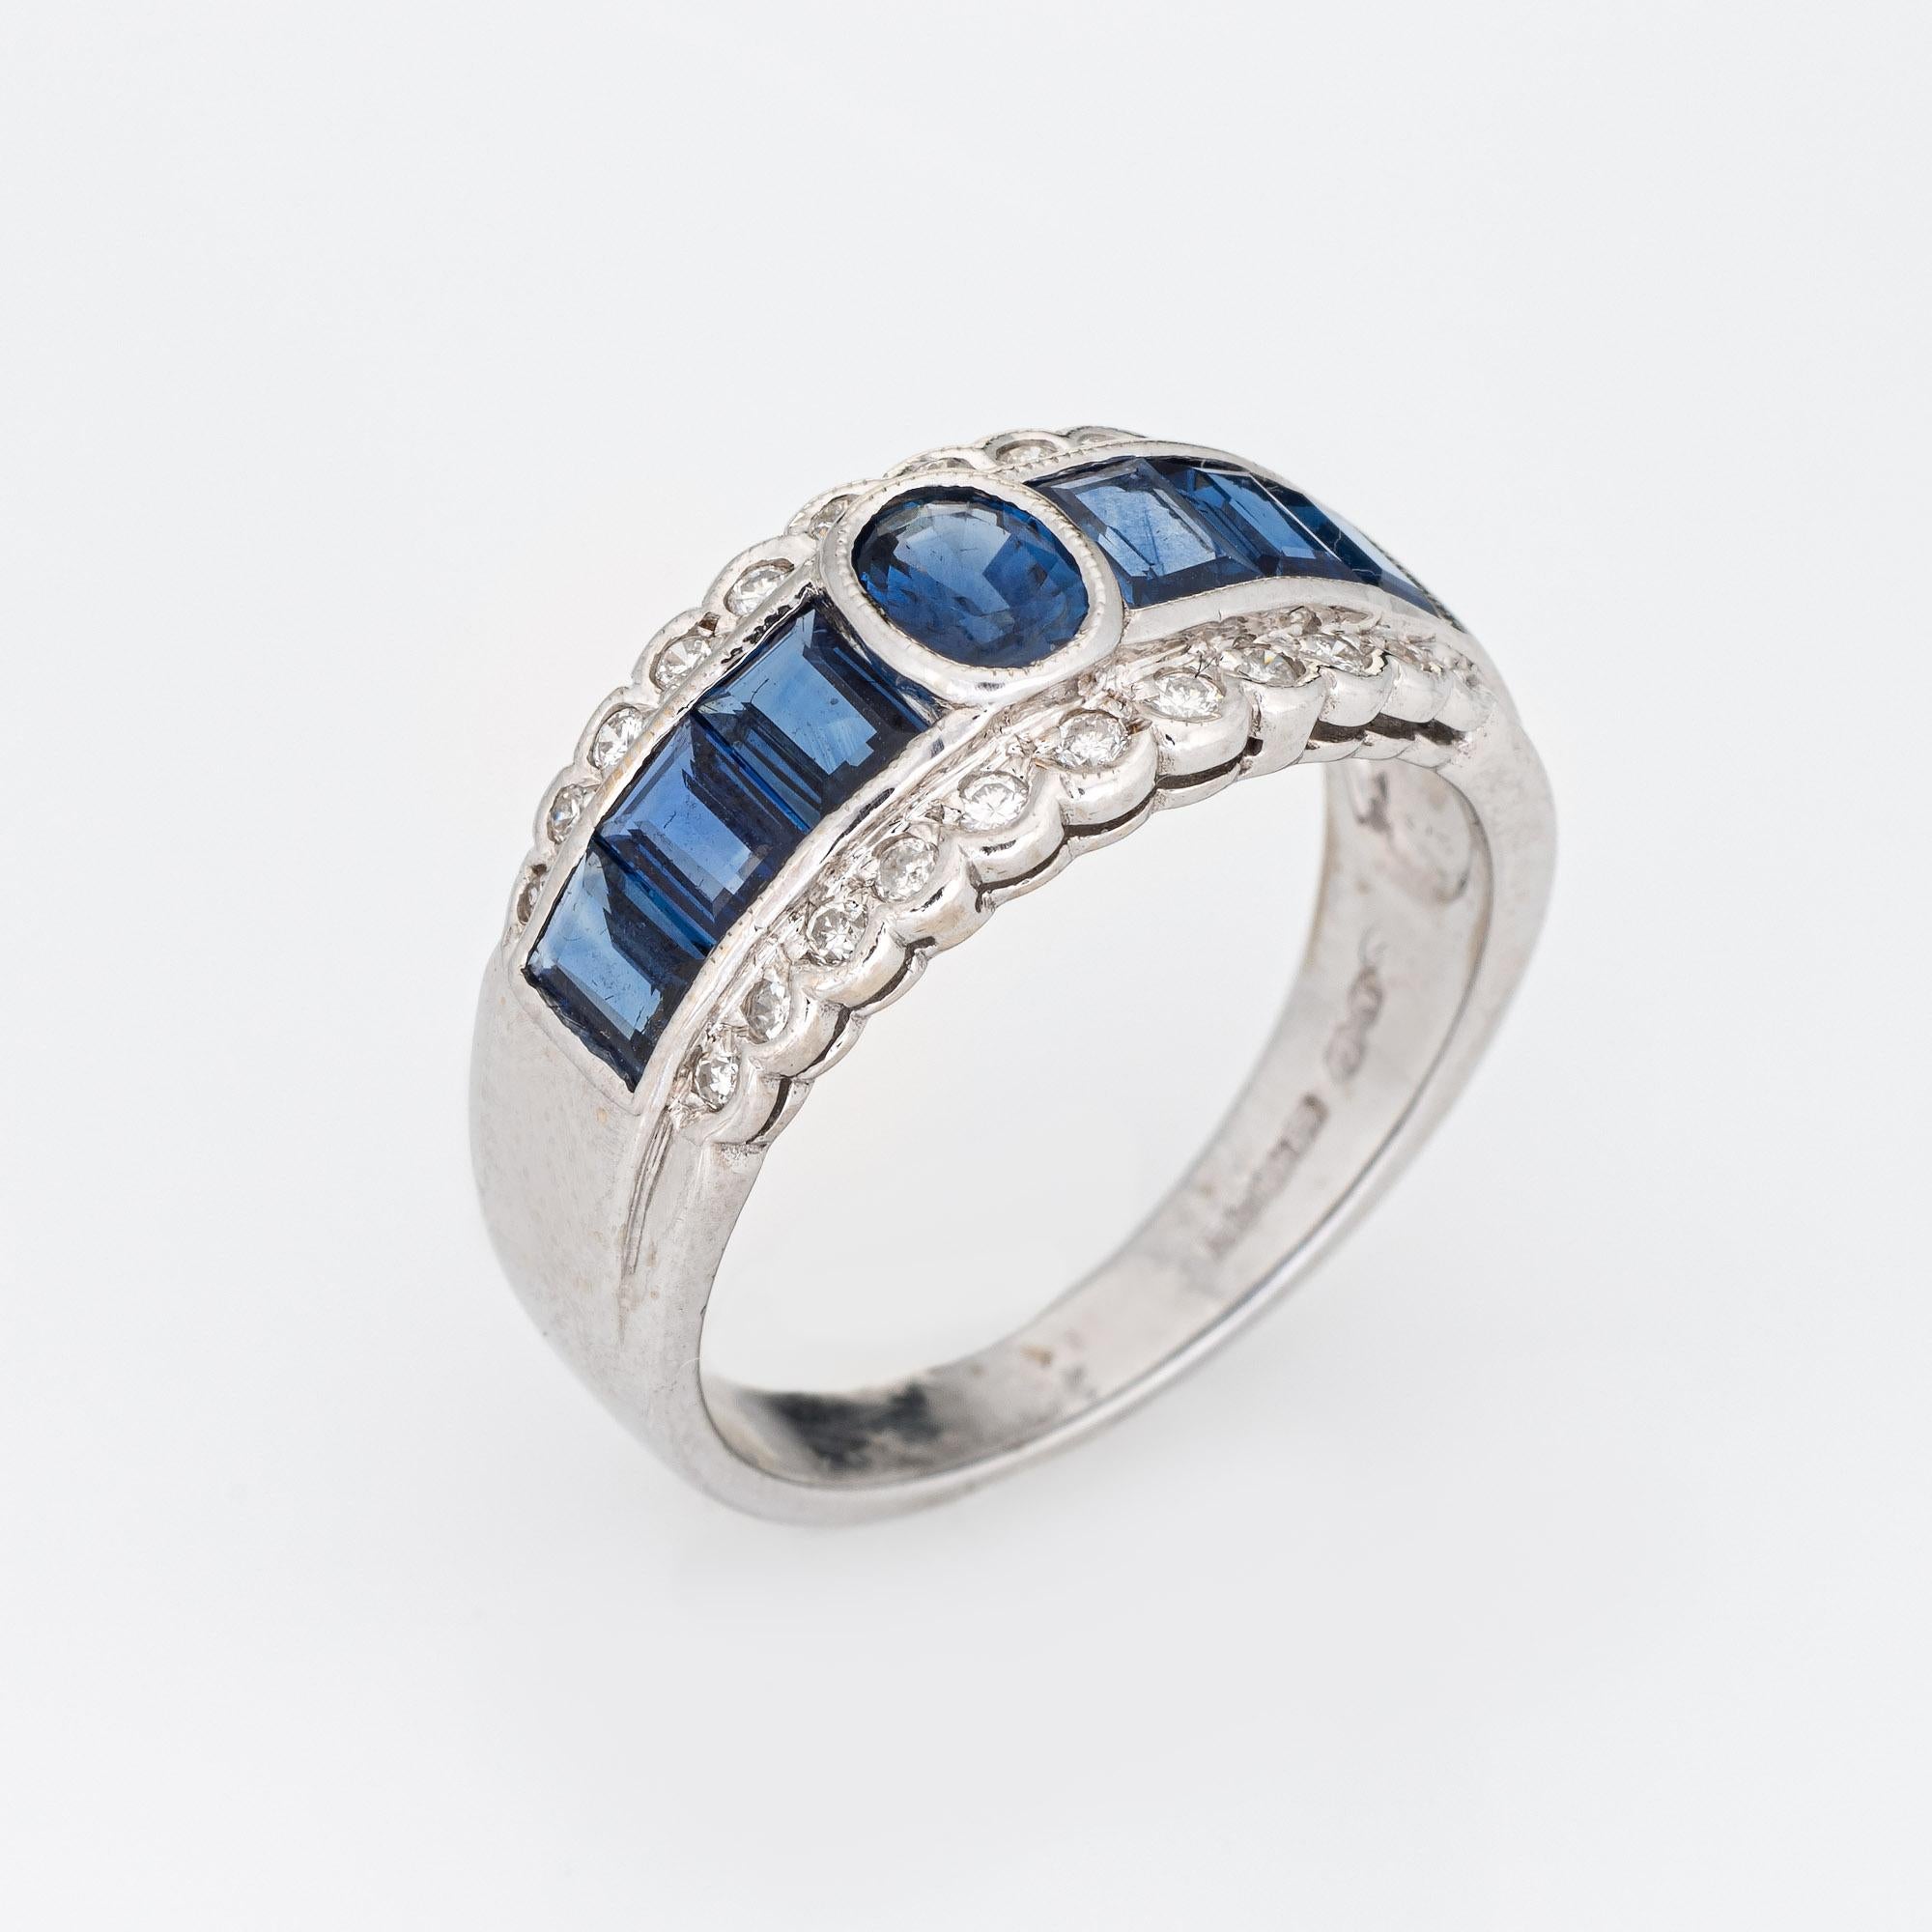 Stylish sapphire & diamond band crafted in 18 karat white gold. 

Sapphires total an estimated 1.50 carats, accented with an estimated 0.20 carats of diamonds (estimated at H-I color and VS2-SI1 clarity). The sapphires are in very good condition and